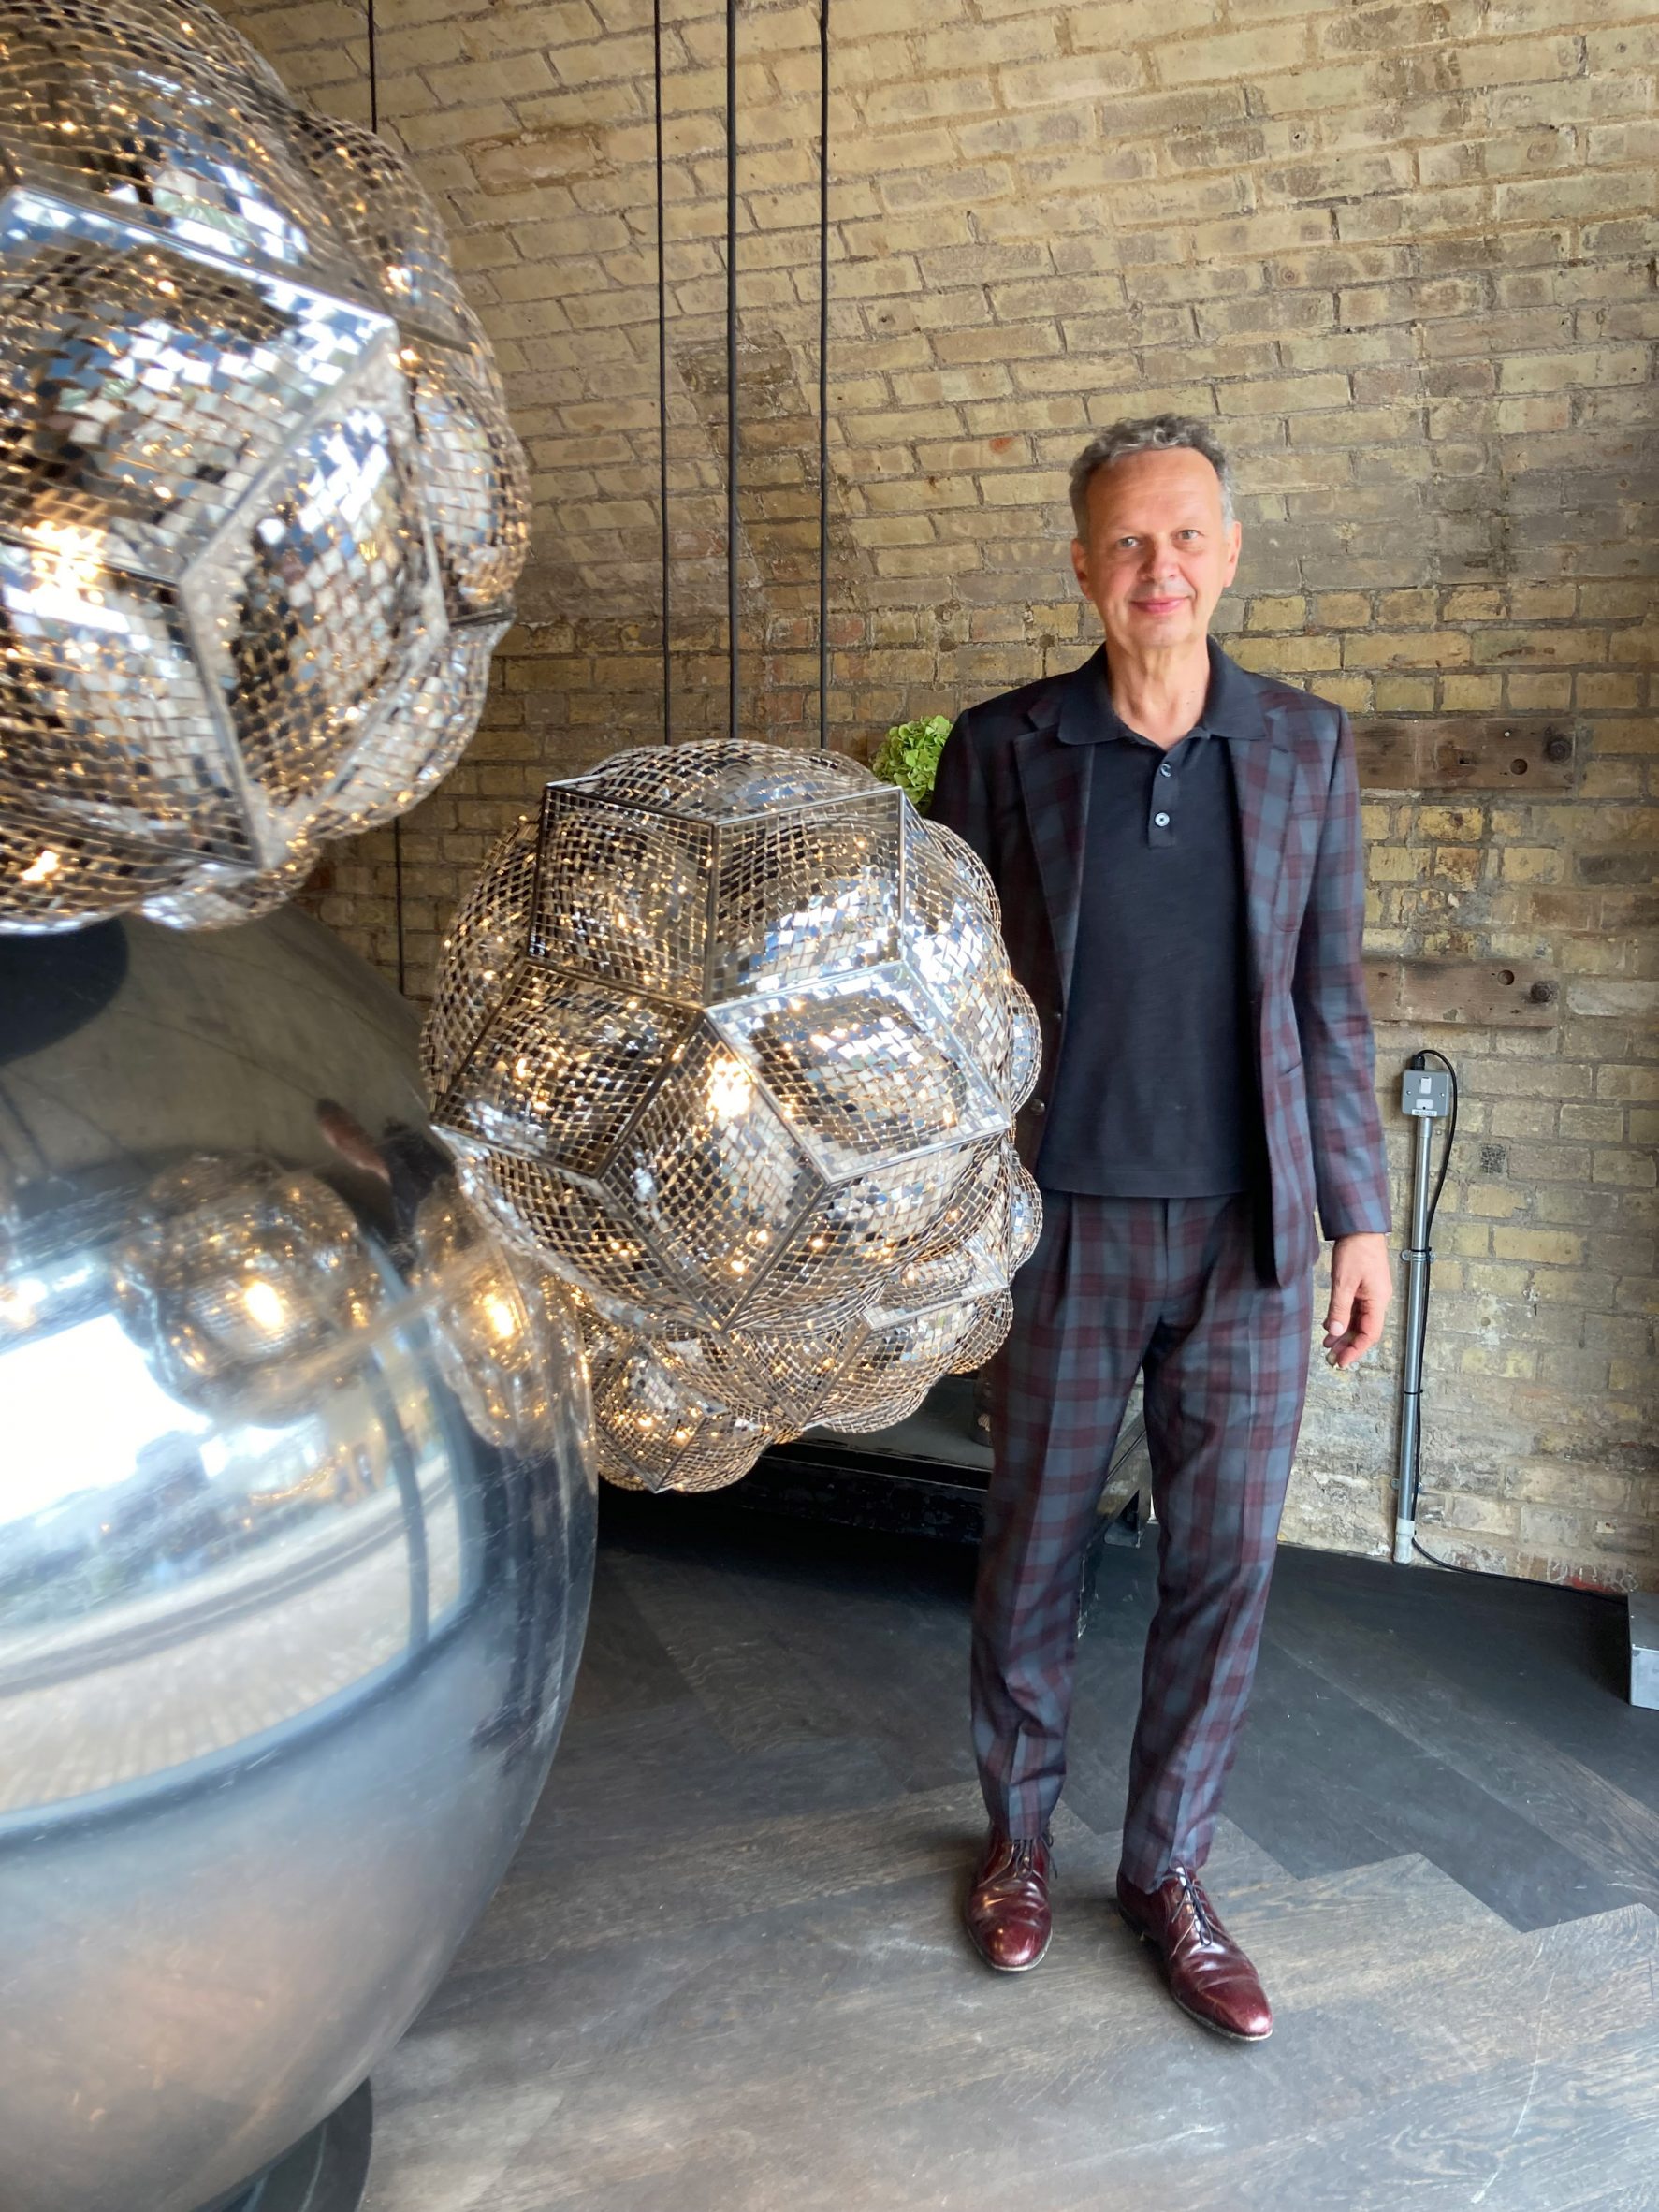 Tom Dixon with his creations at the Hypermobile exhibition at Coal Drops Yard in King's Cross